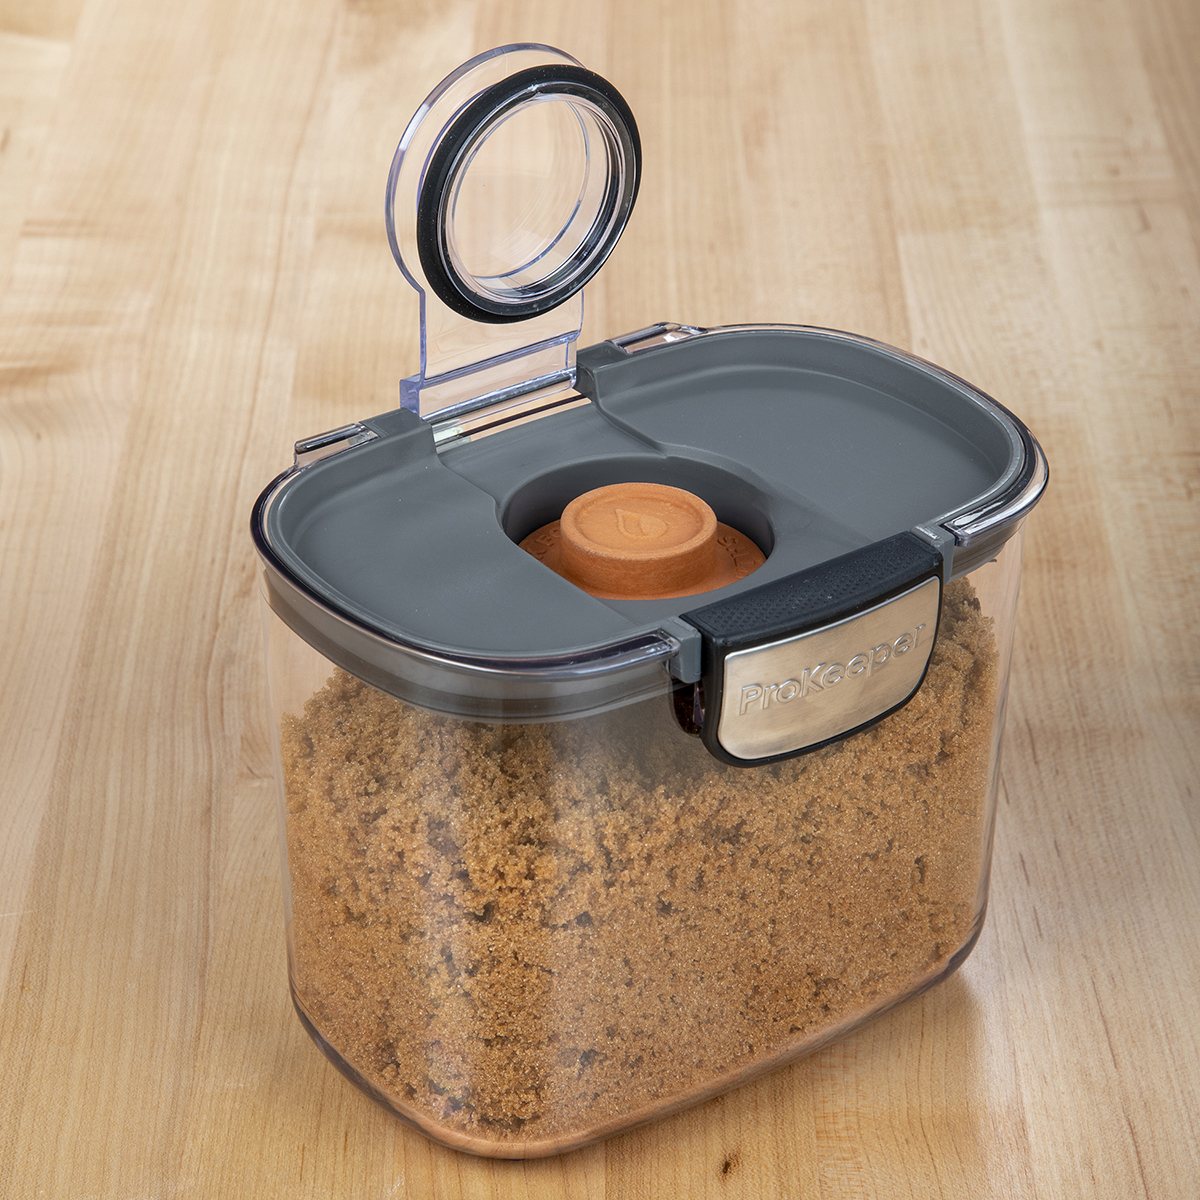 https://www.containerstore.com/catalogimages/403427/10083497-PKS-Brown-Sugar-Container-V.jpg